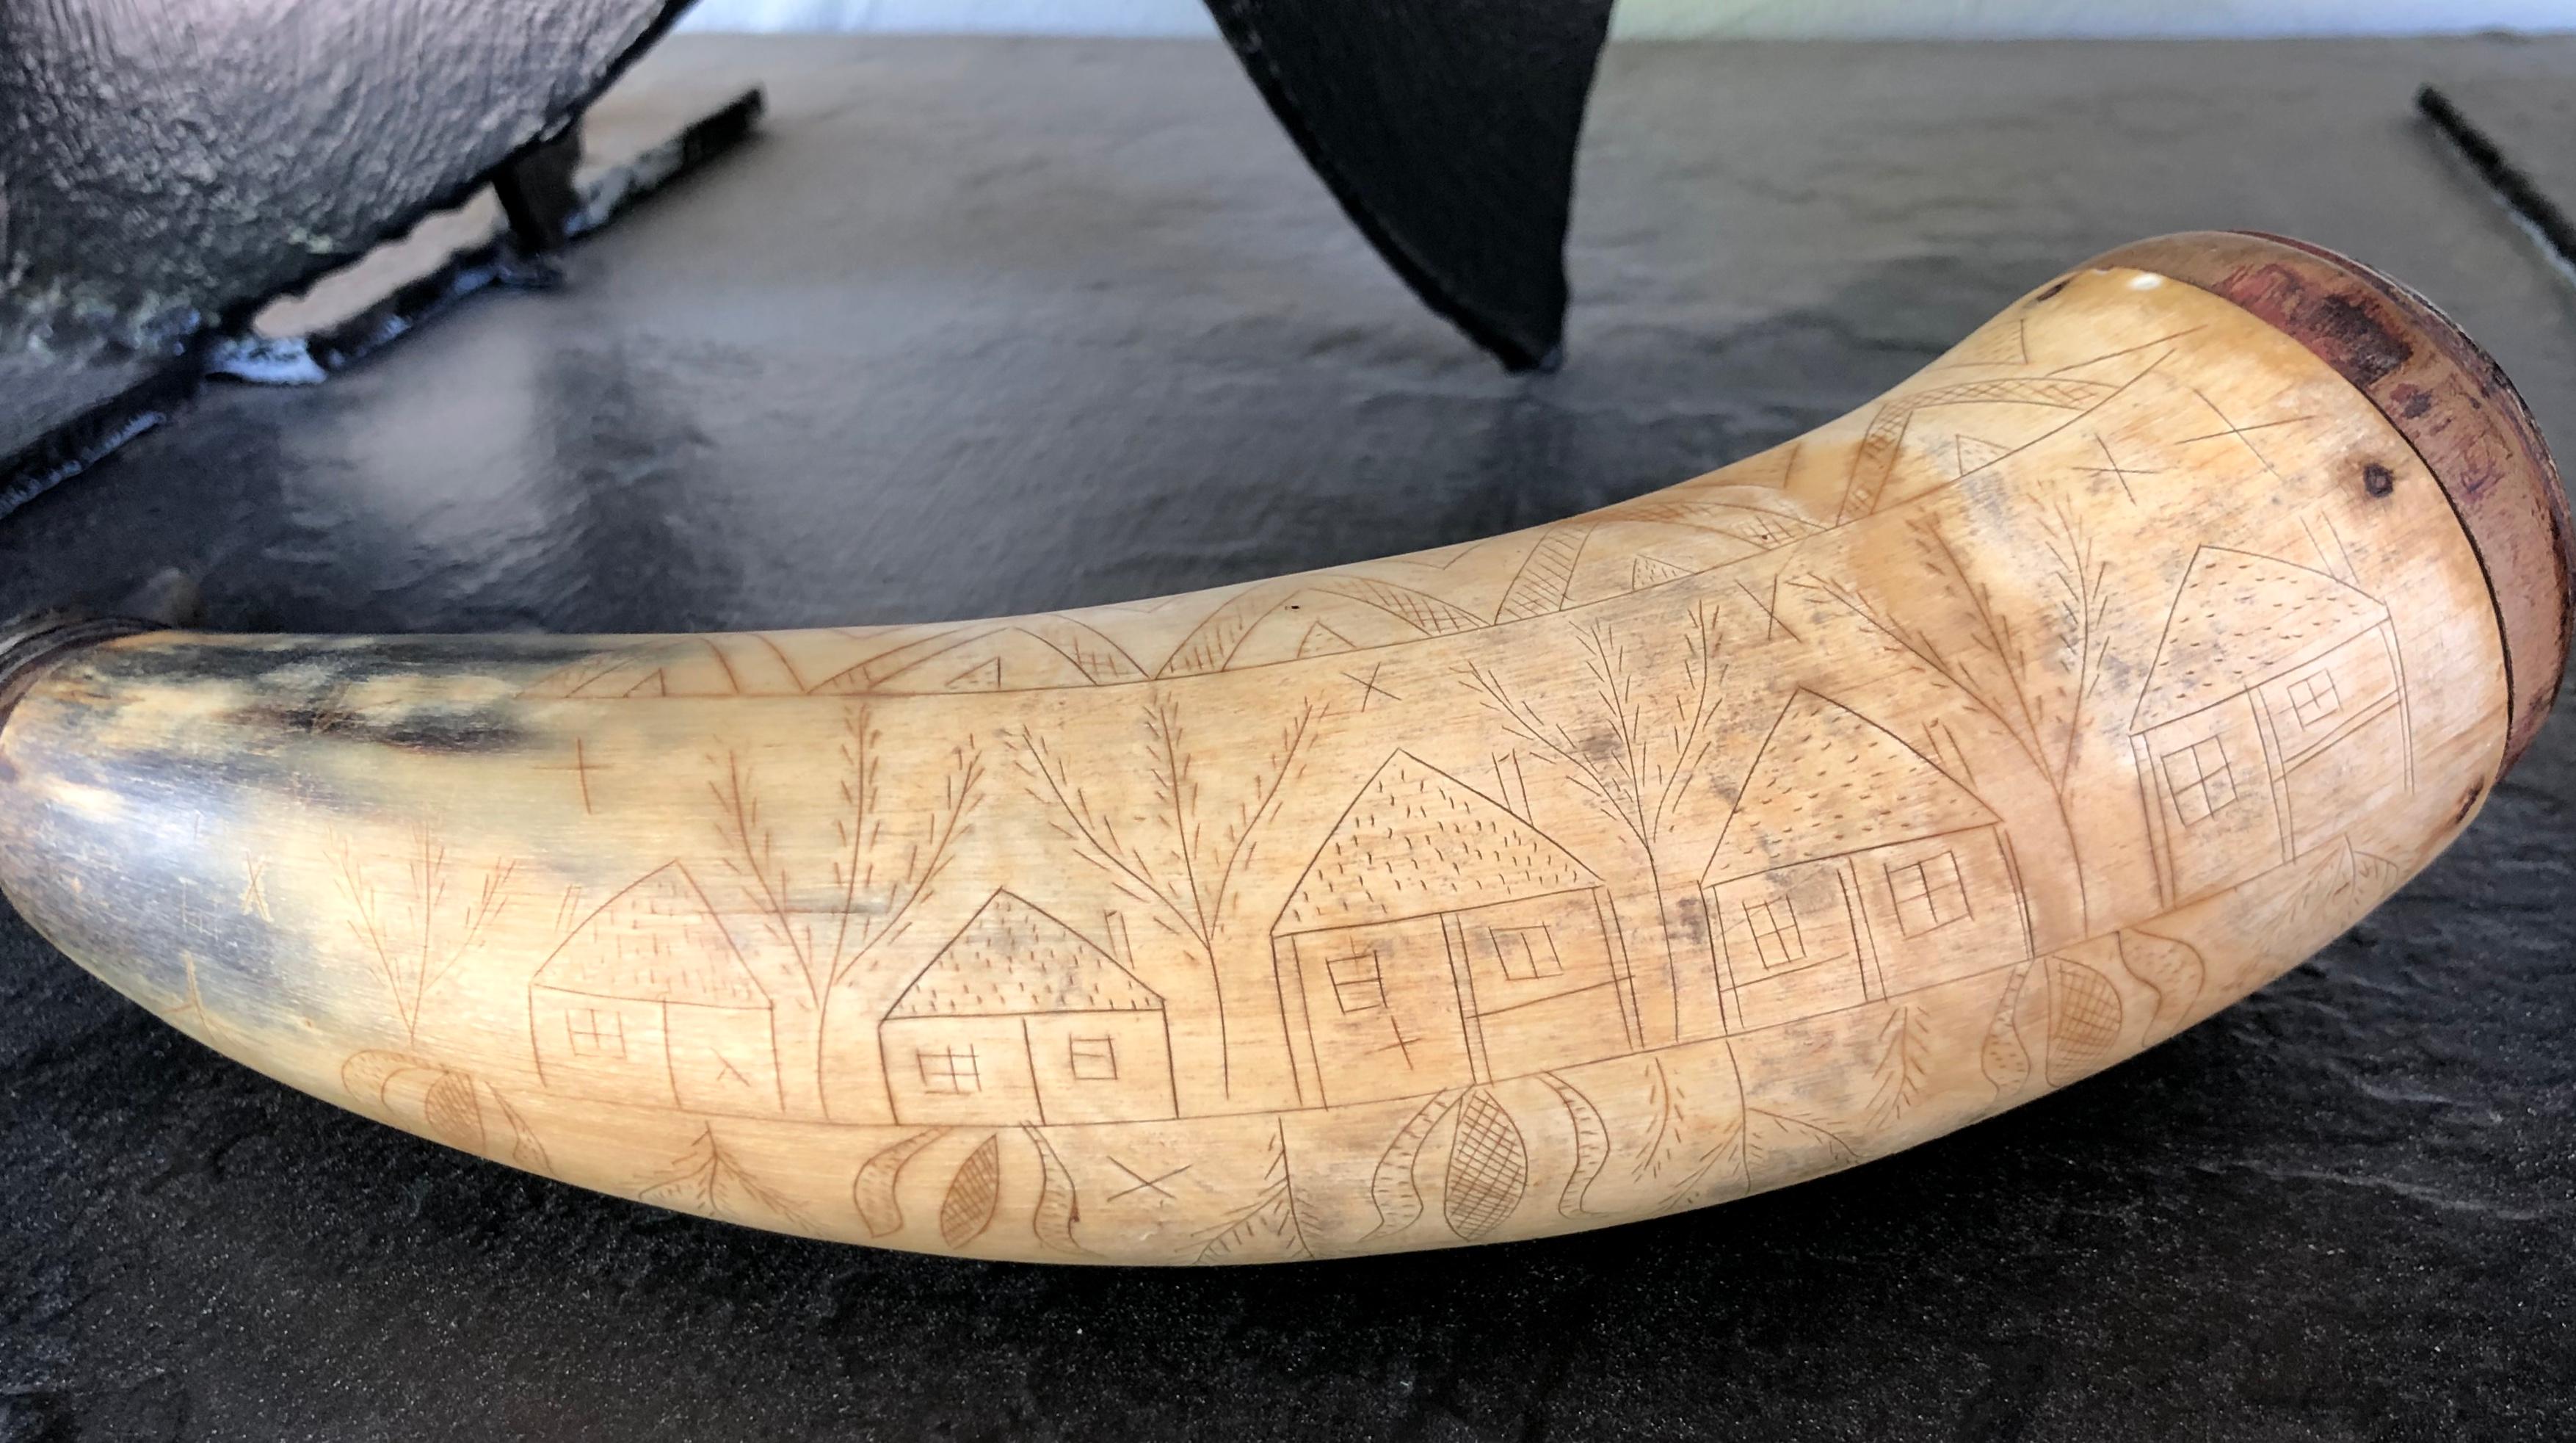 Featuring 5 houses, 5 diamonds, 5 sets of triangles, and 5 trees. There are also sets pinwheels and flowers. Similar style carved powder horns are known to have come from eastern Pennsylvania. There is a very folky man featured as well. Great